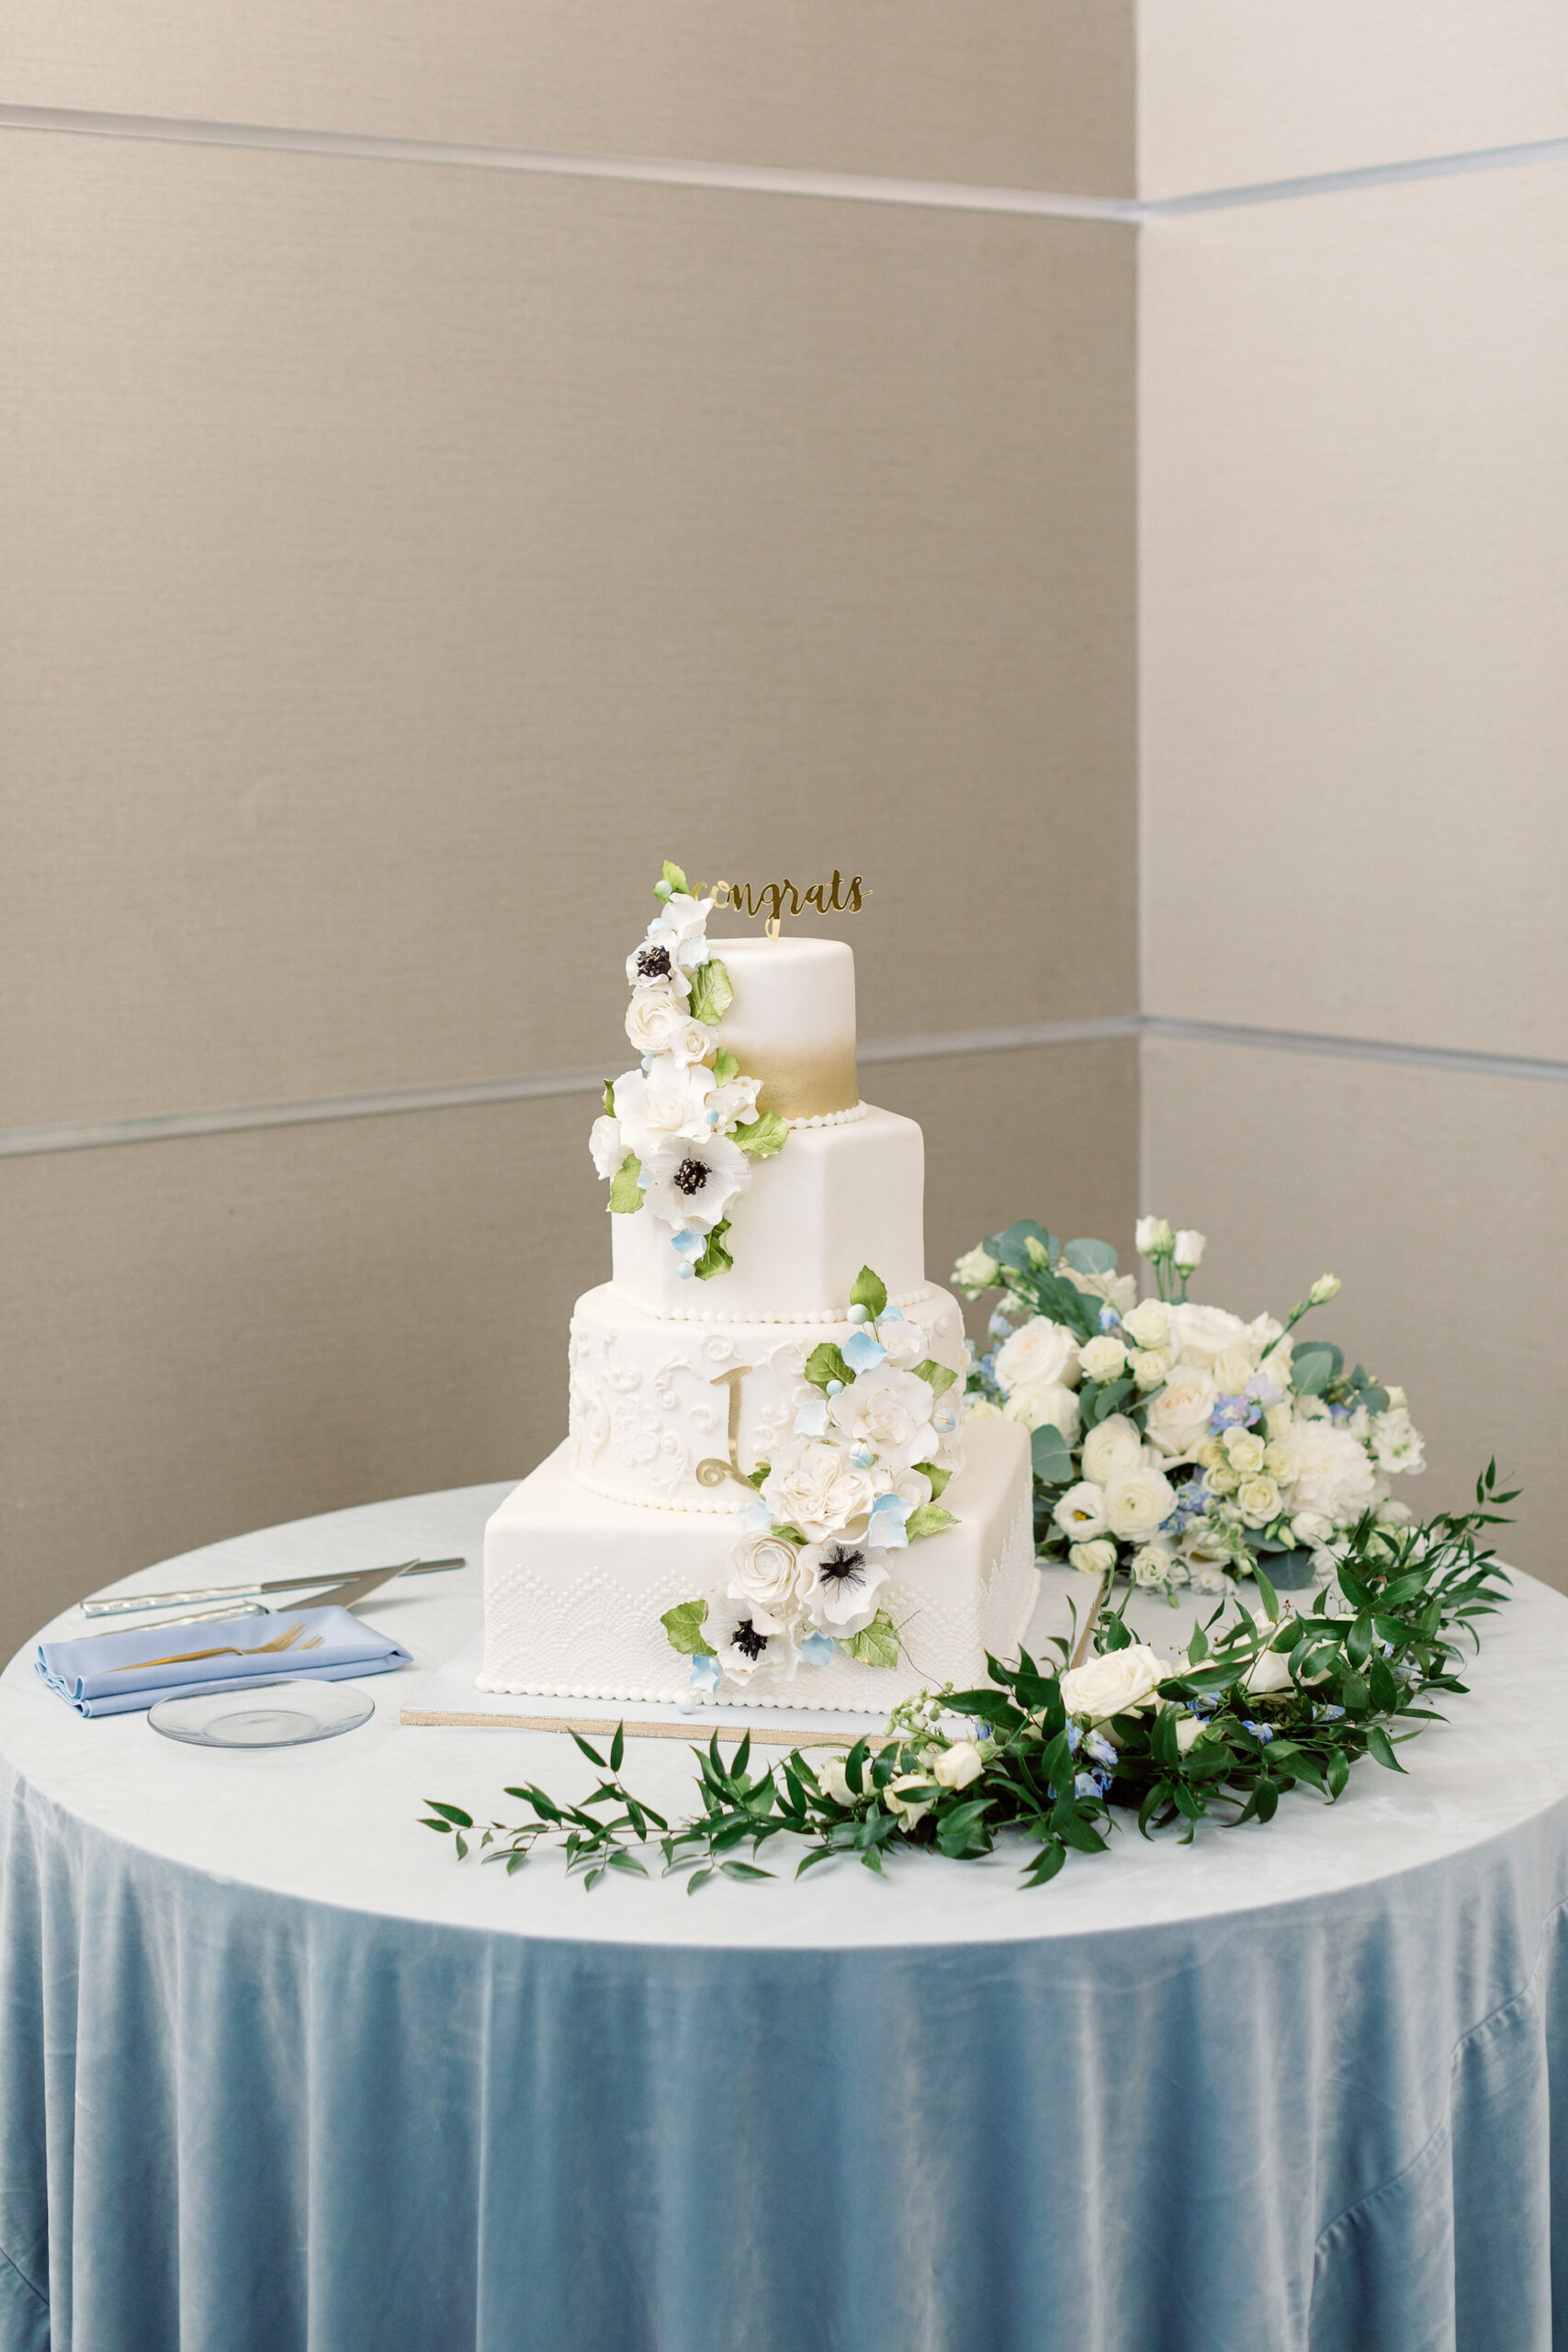 Four-tiered White Geometric Wedding Cake with Cascading Flowers